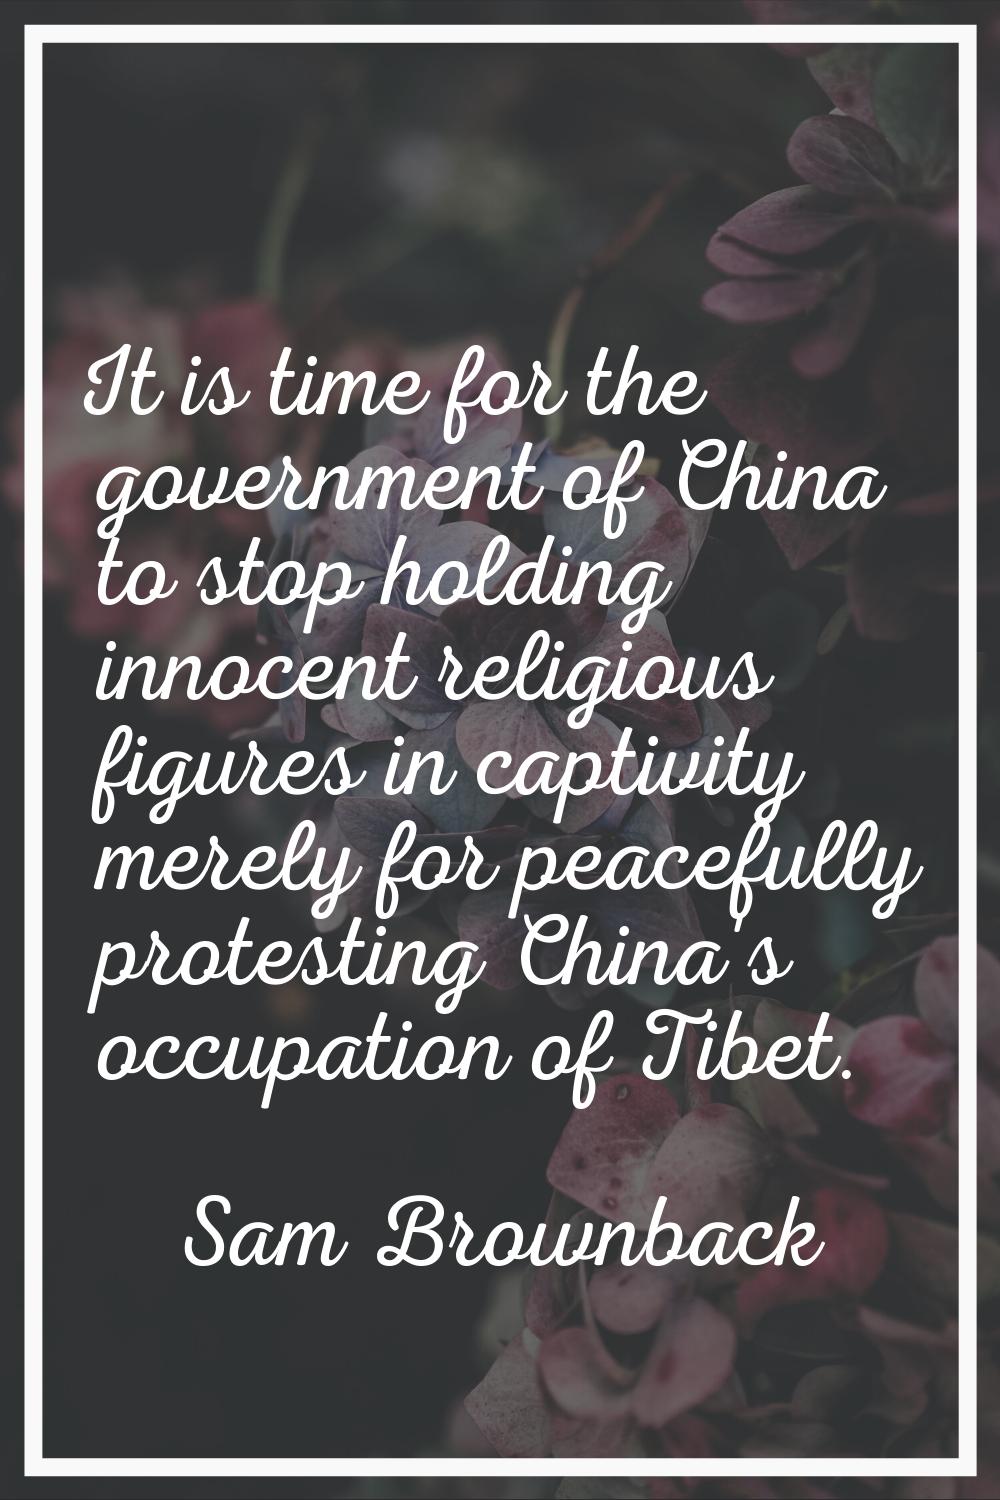 It is time for the government of China to stop holding innocent religious figures in captivity mere